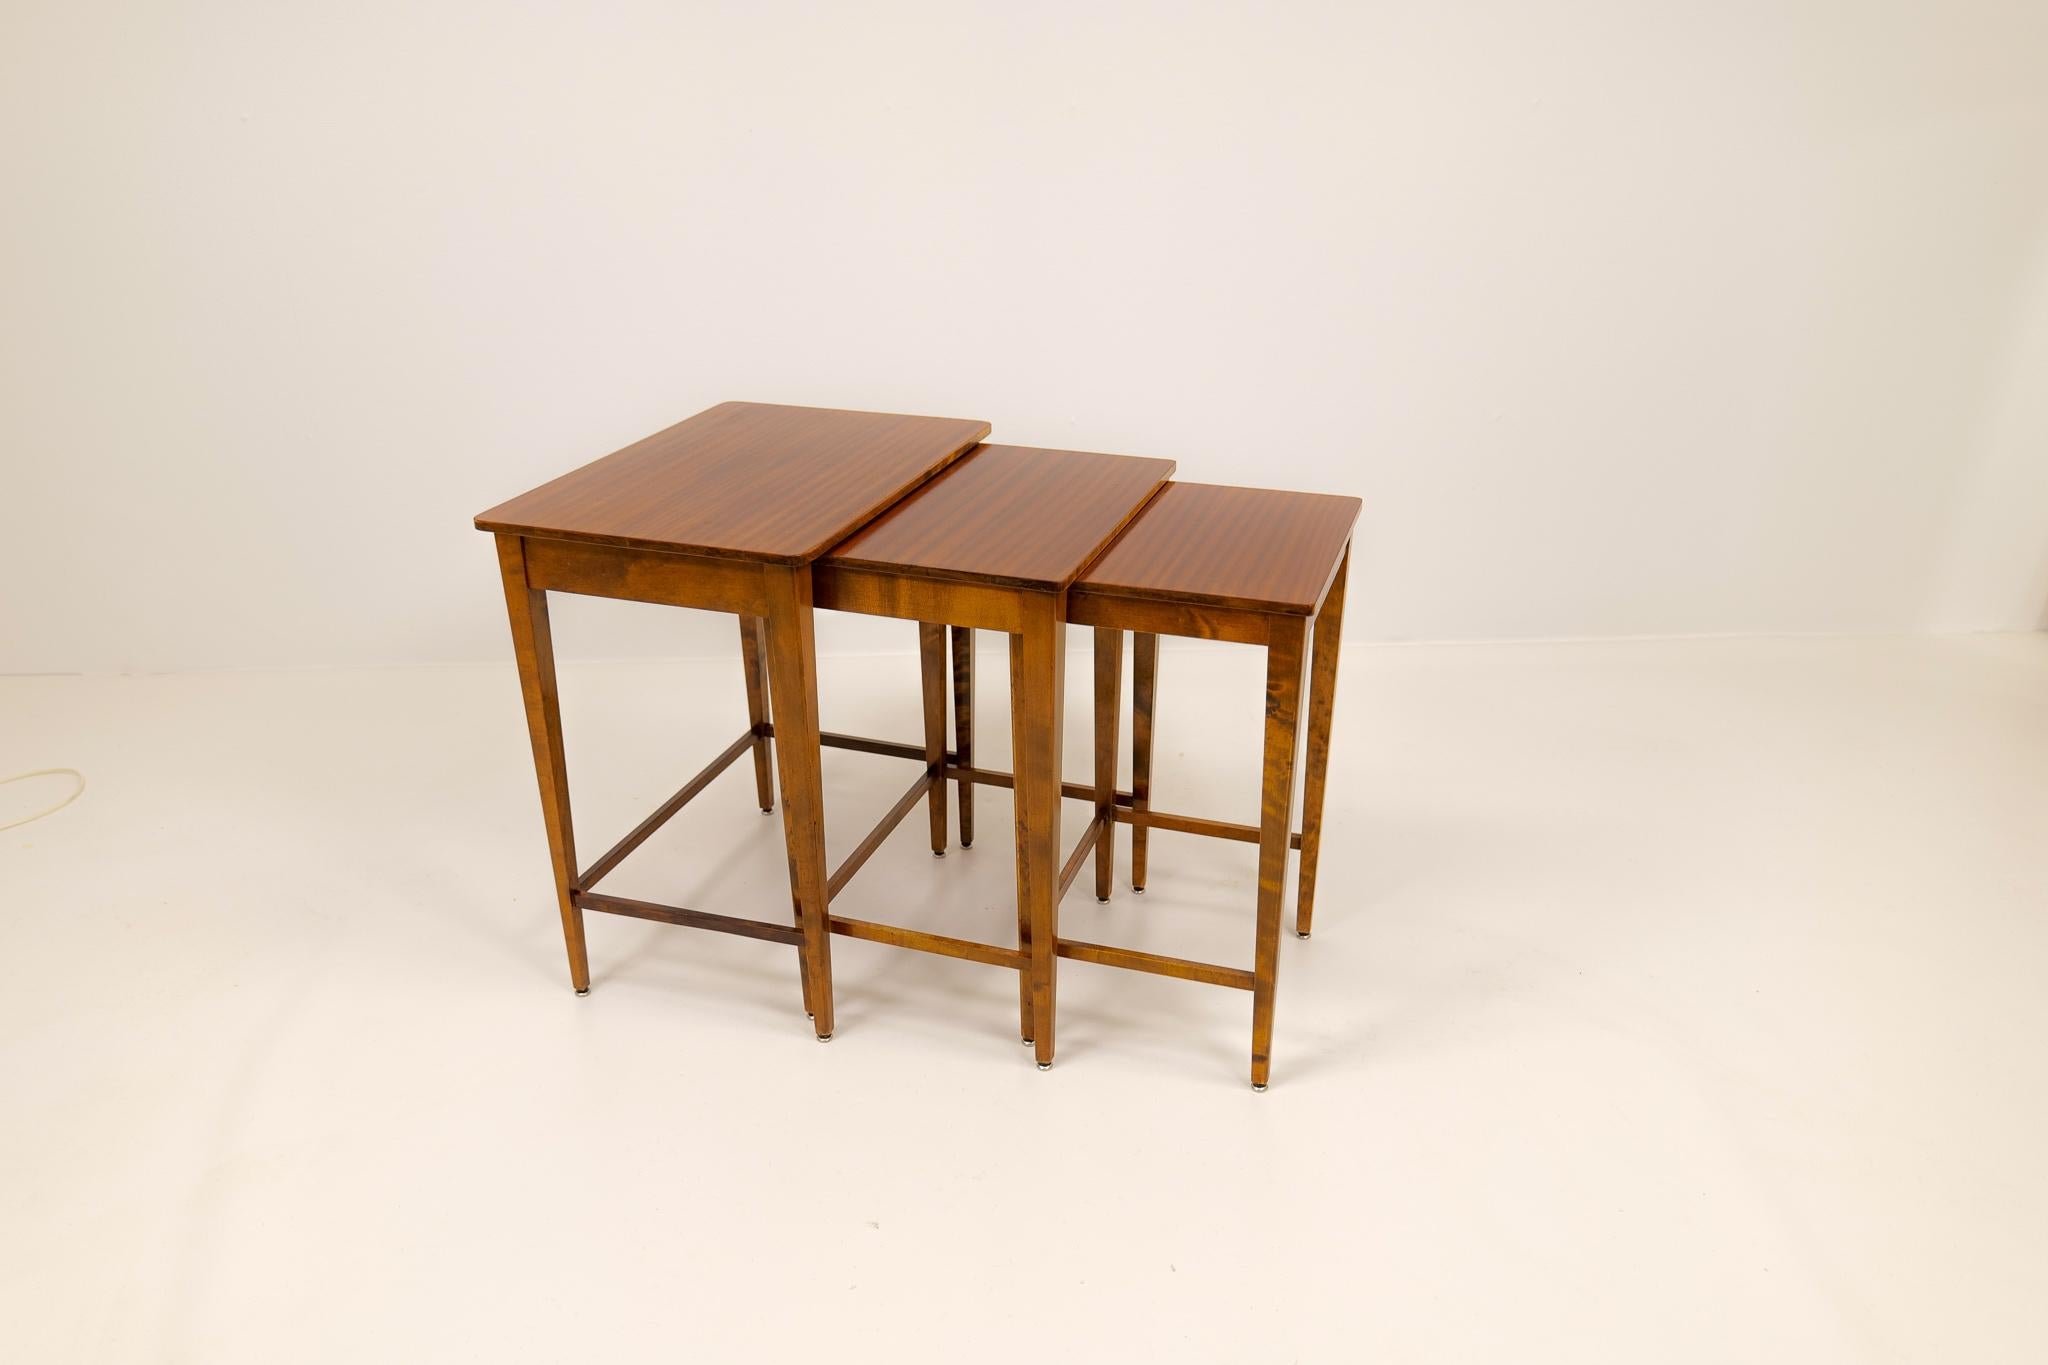 Mid-20th Century Art Deco Nesting Tables Mahogany and Stained Birch, NK Sweden, 1940s For Sale